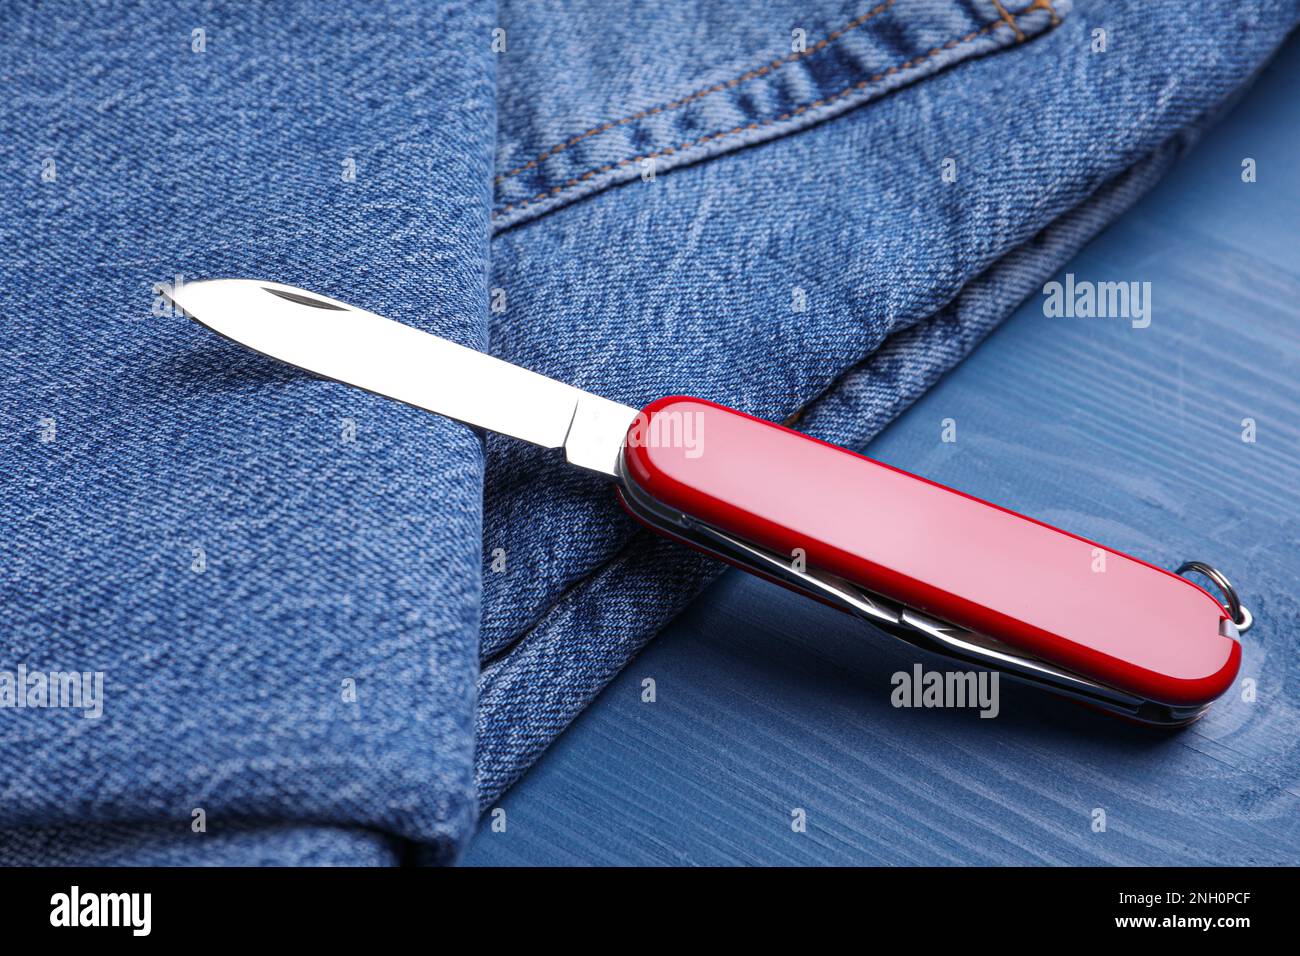 https://c8.alamy.com/comp/2NH0PCF/modern-compact-portable-multitool-and-jeans-on-blue-wooden-table-2NH0PCF.jpg